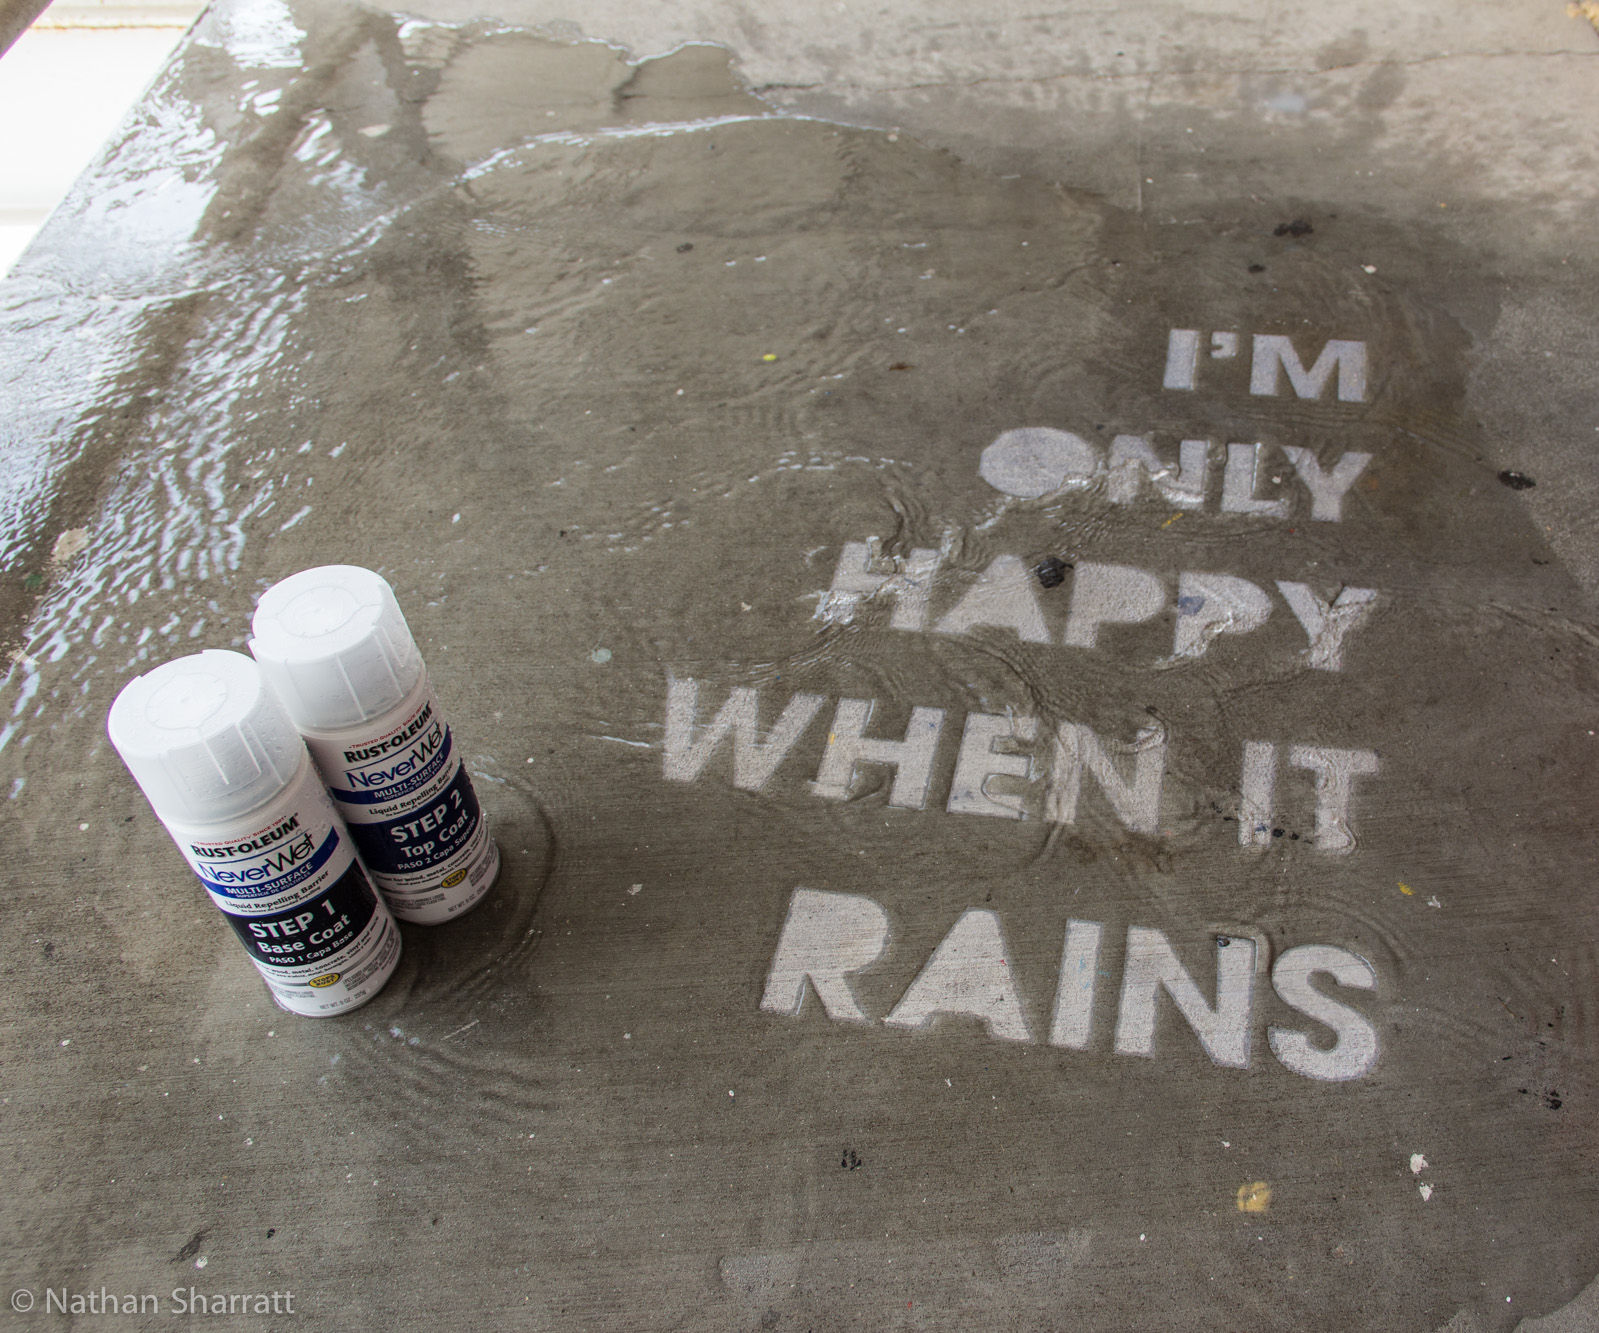 How to make Rain Drawings with NeverWet superhydrophobic coating